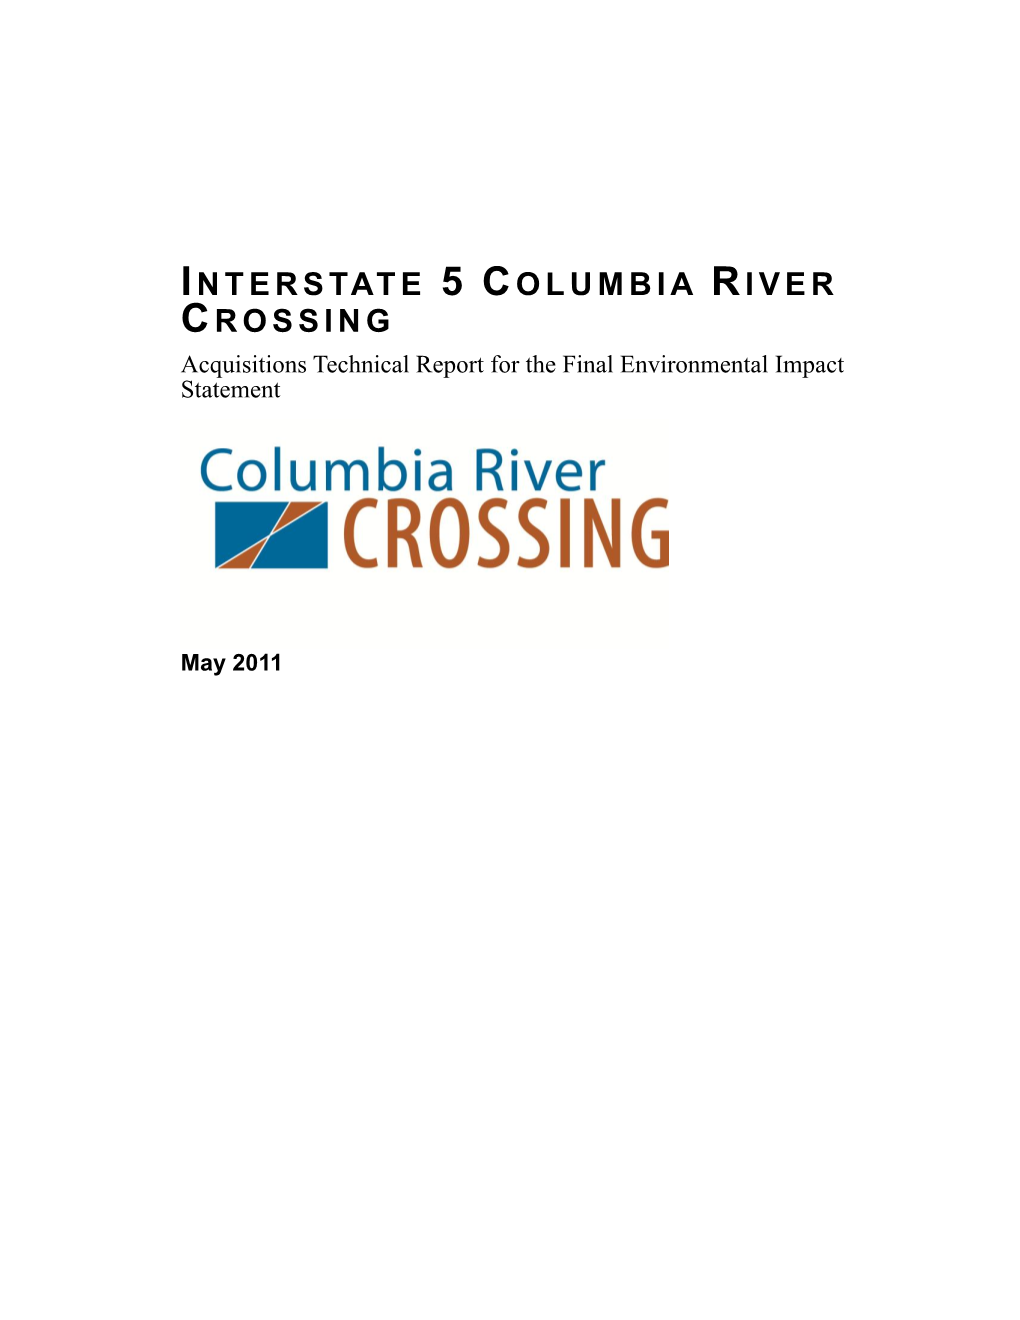 Interstate 5 Columbia River Crossing Acquisitions Technical Report for the Final Environmental Impact Statement